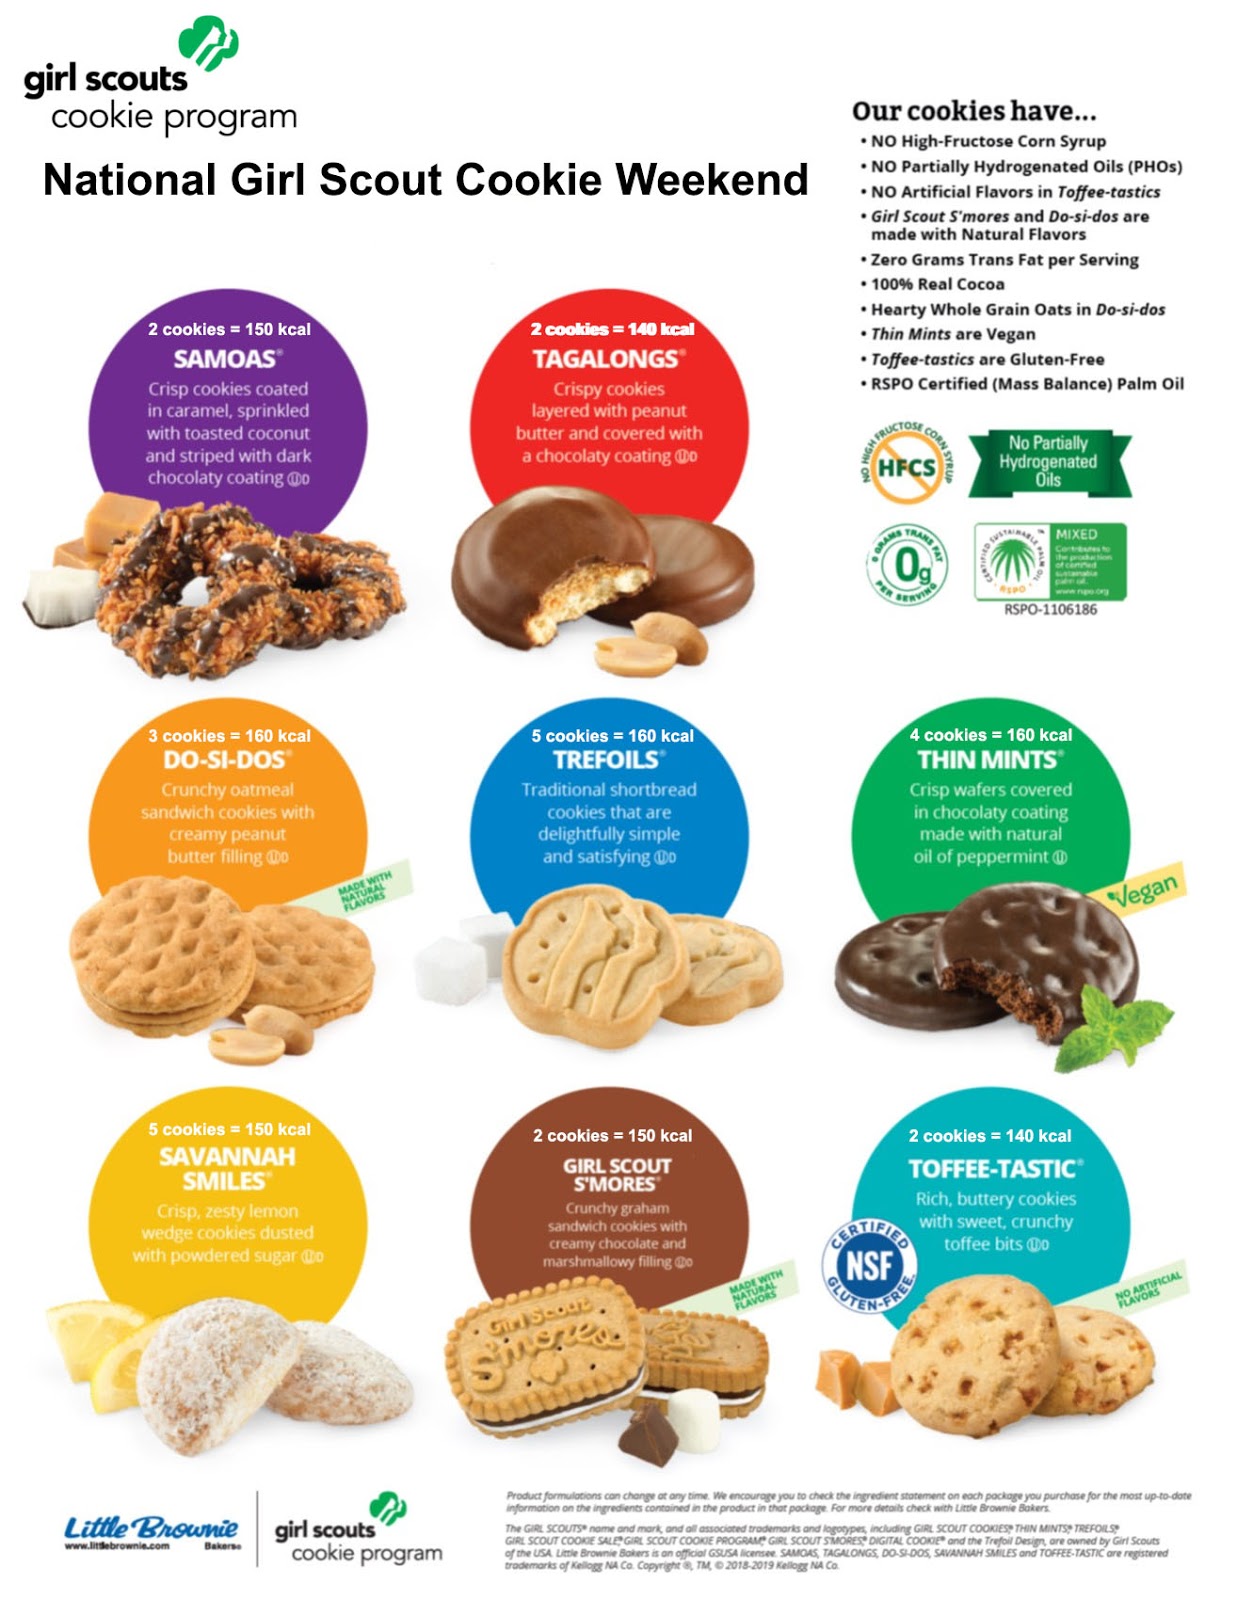 Dietitians Online Blog March 12, Girl Scouts of USA Founded Key Skills